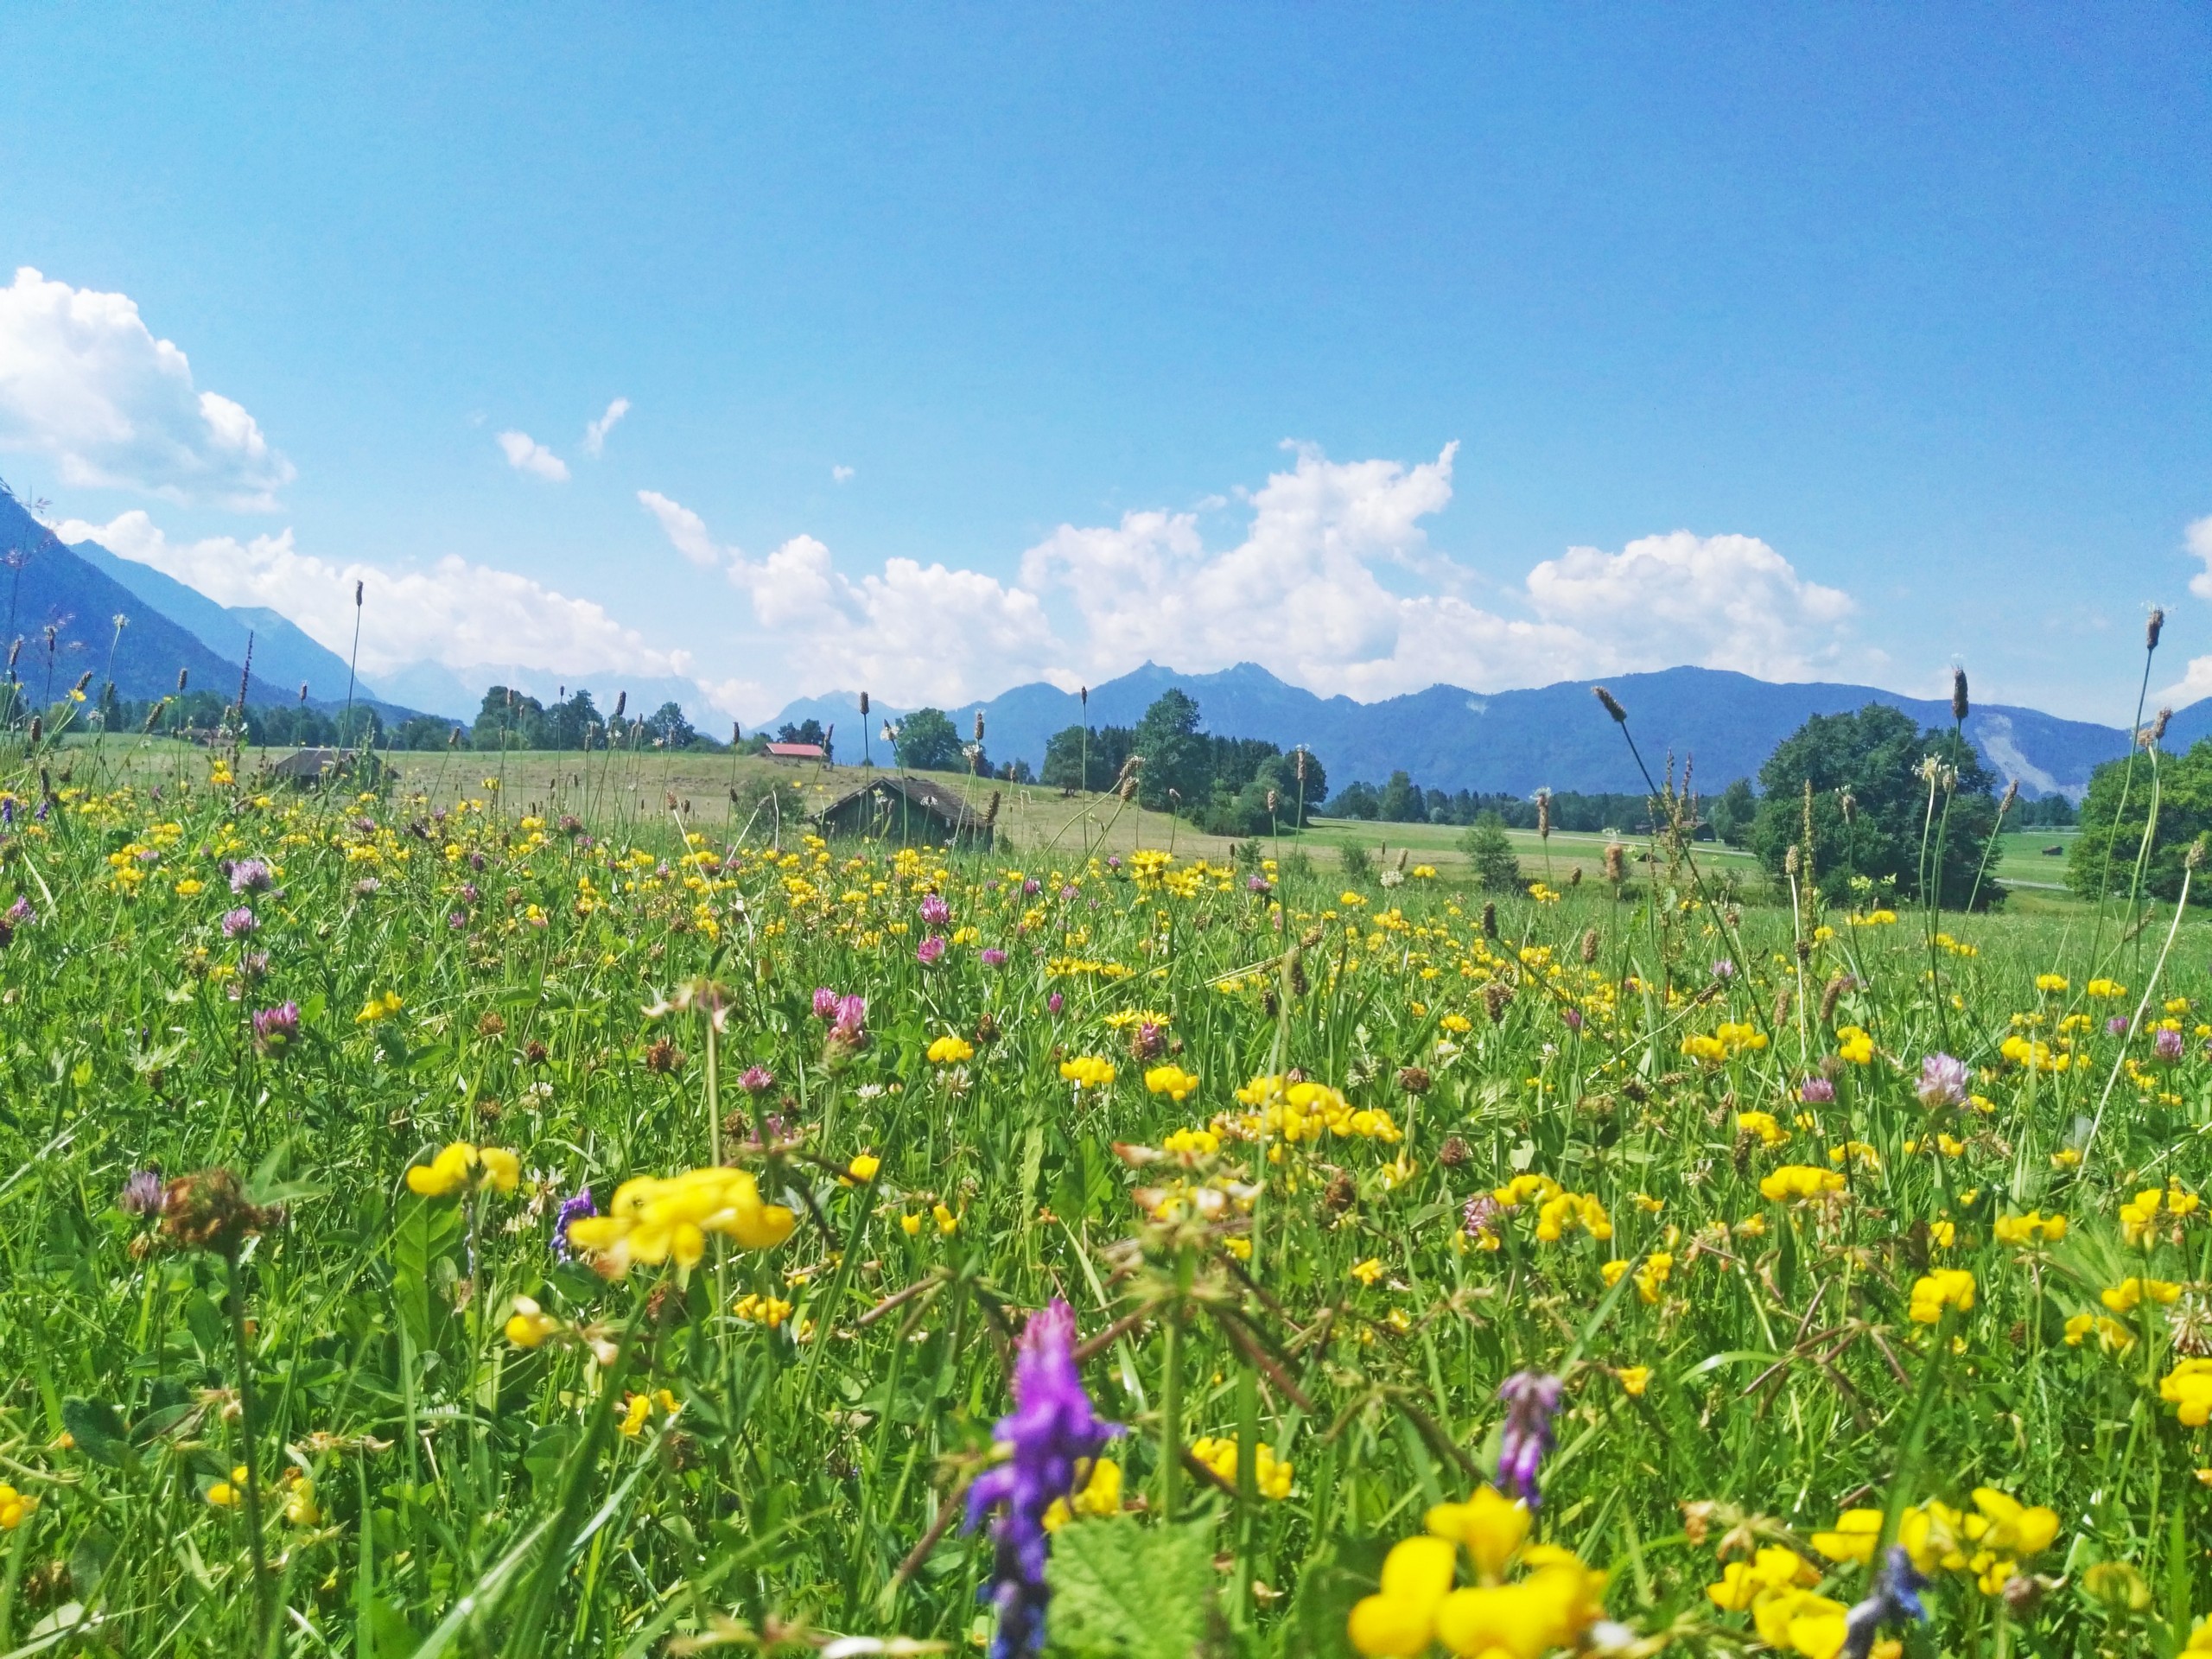 Lush flower fields along the Chiemsee cycling route in Upper Bavaria